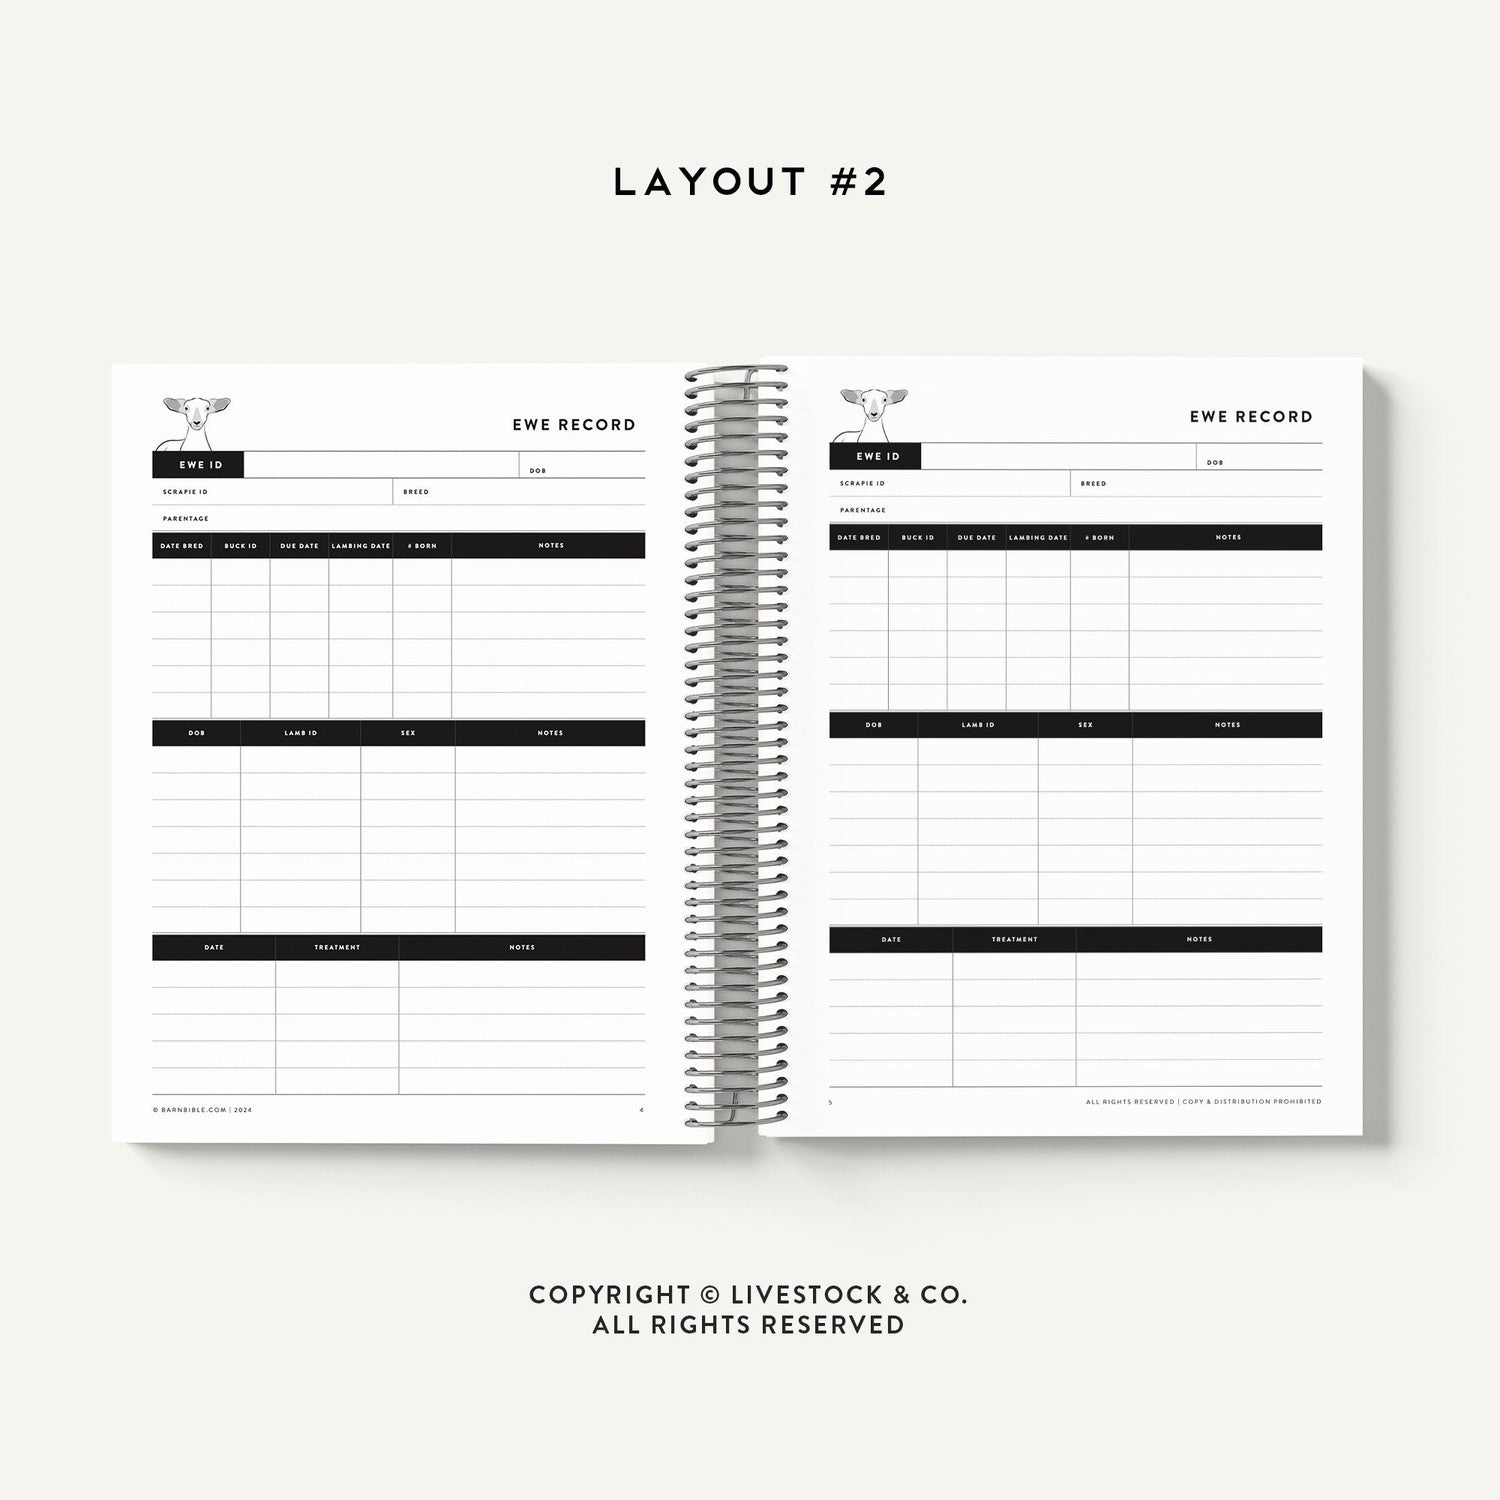 Personalized-Livestock-Lambing Record Planner - Solid Cover